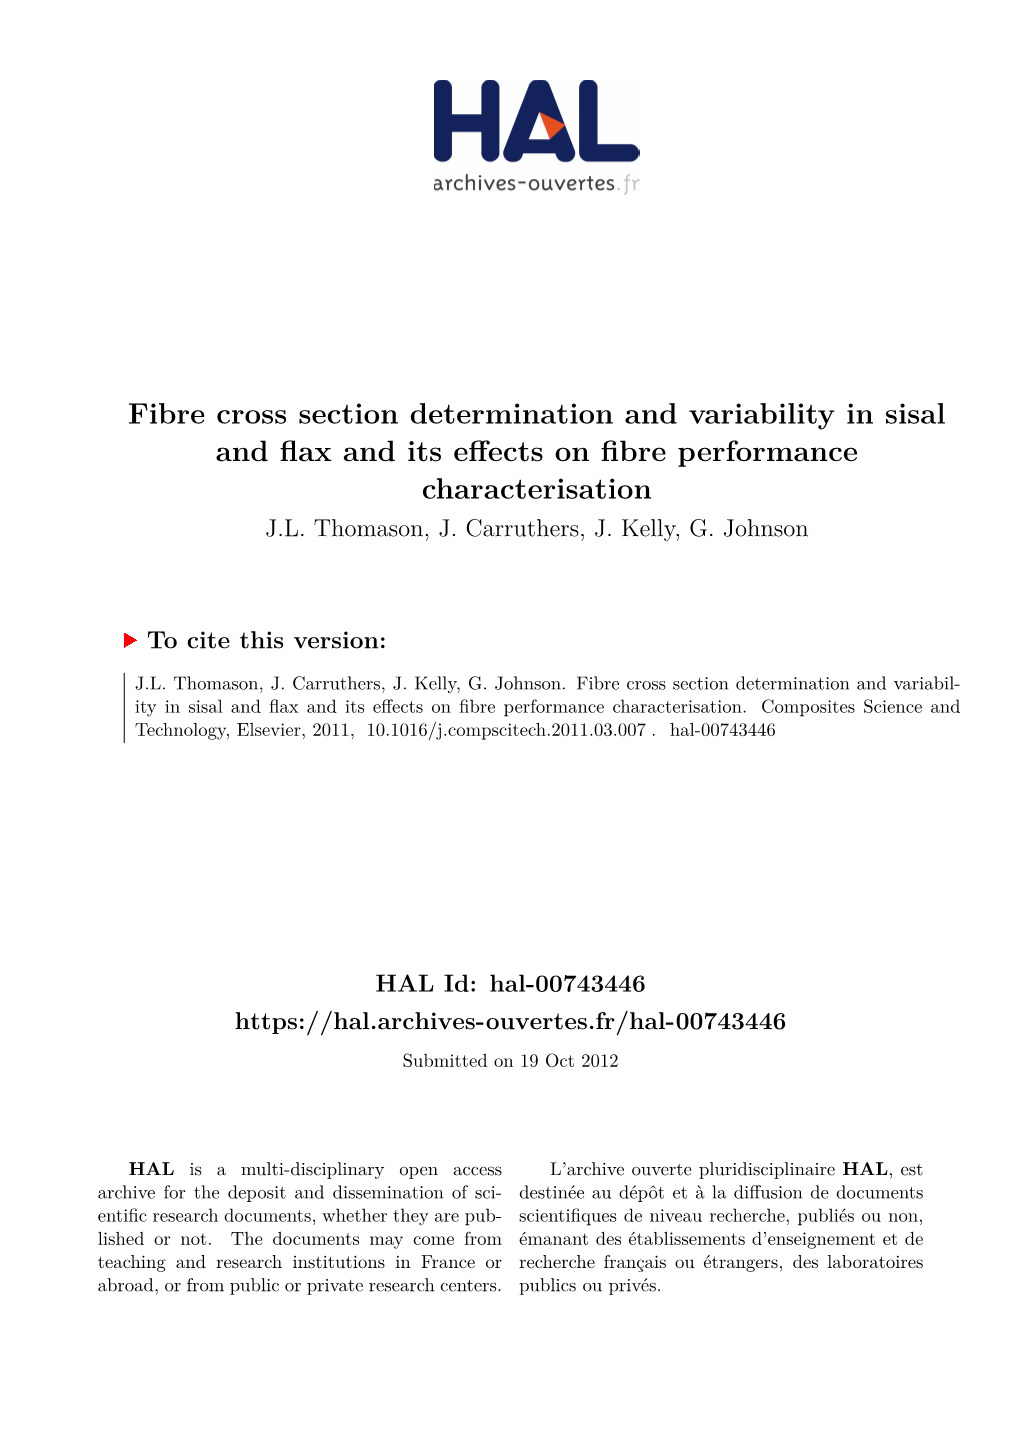 Fibre Cross Section Determination and Variability in Sisal and Flax and Its Effects on Fibre Performance Characterisation J.L